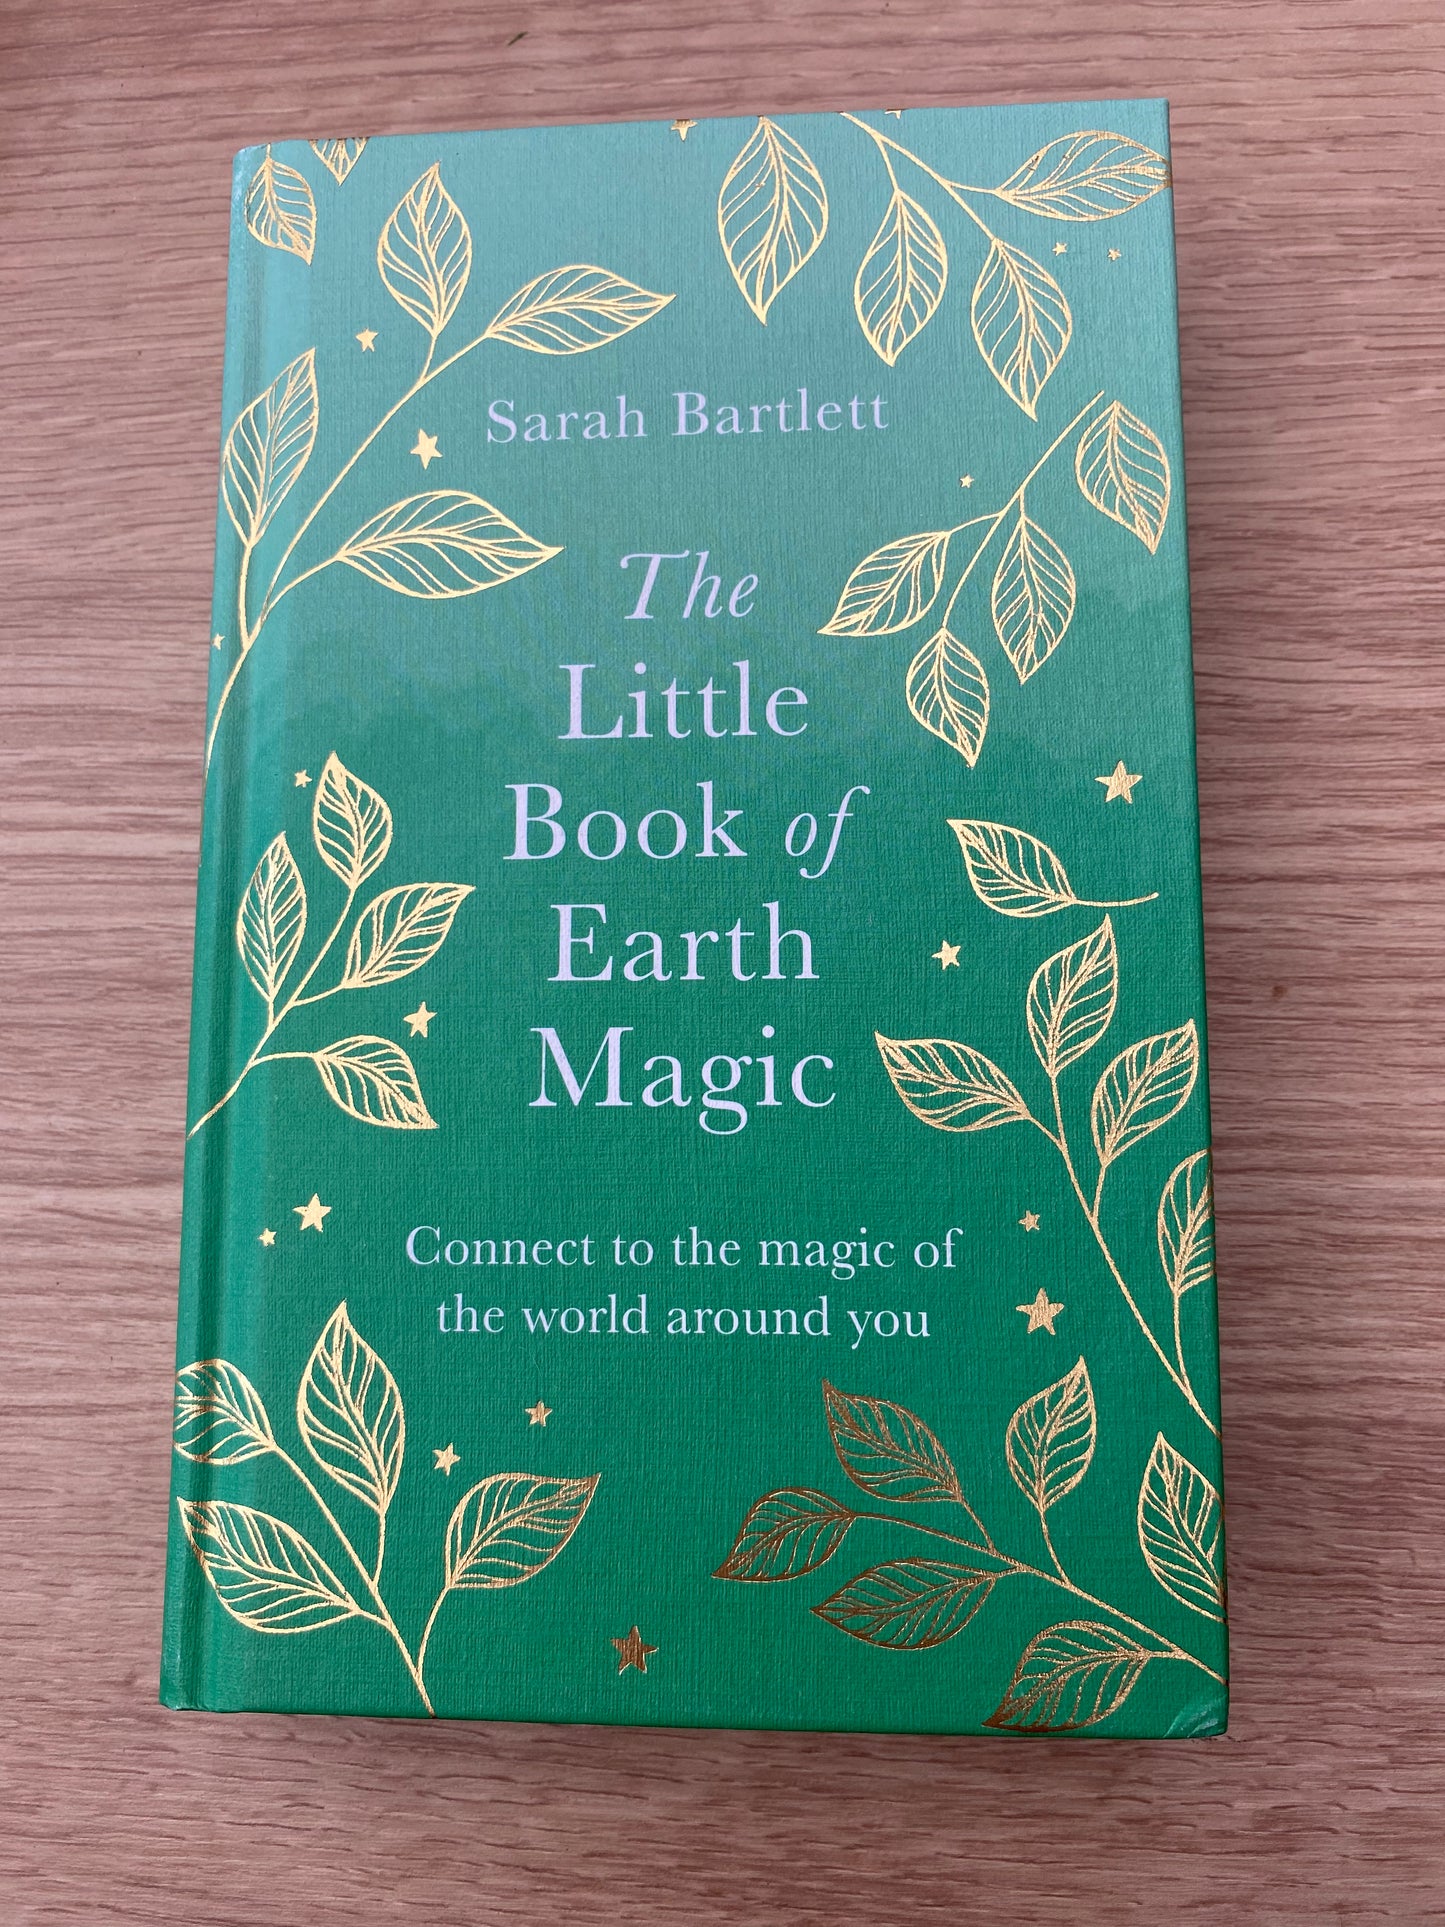 The Little Book of Earth Magic by Sarah Bartlett